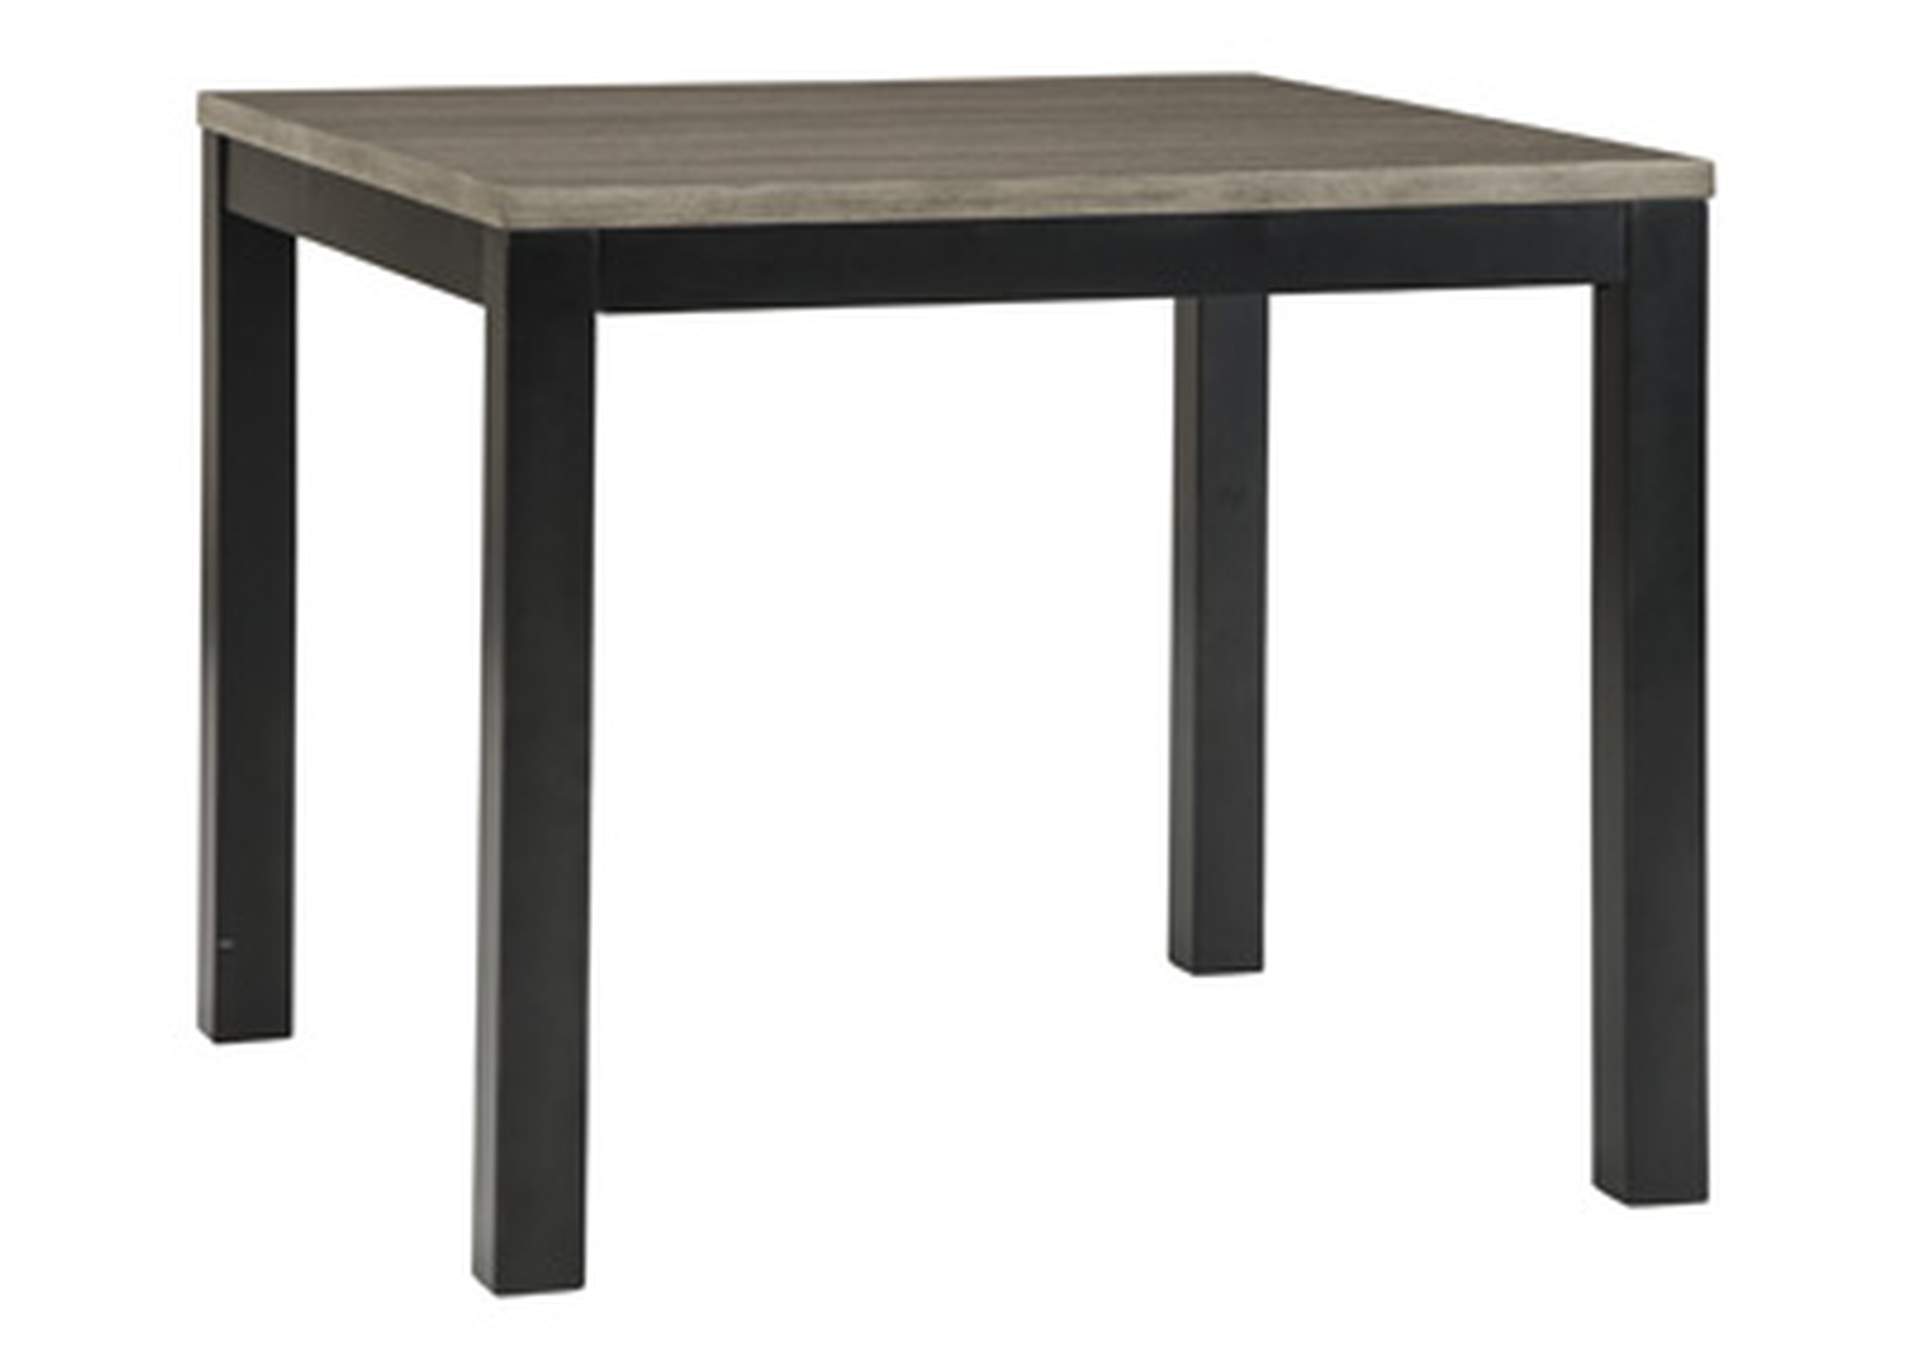 Dontally Counter Height Dining Table,Benchcraft